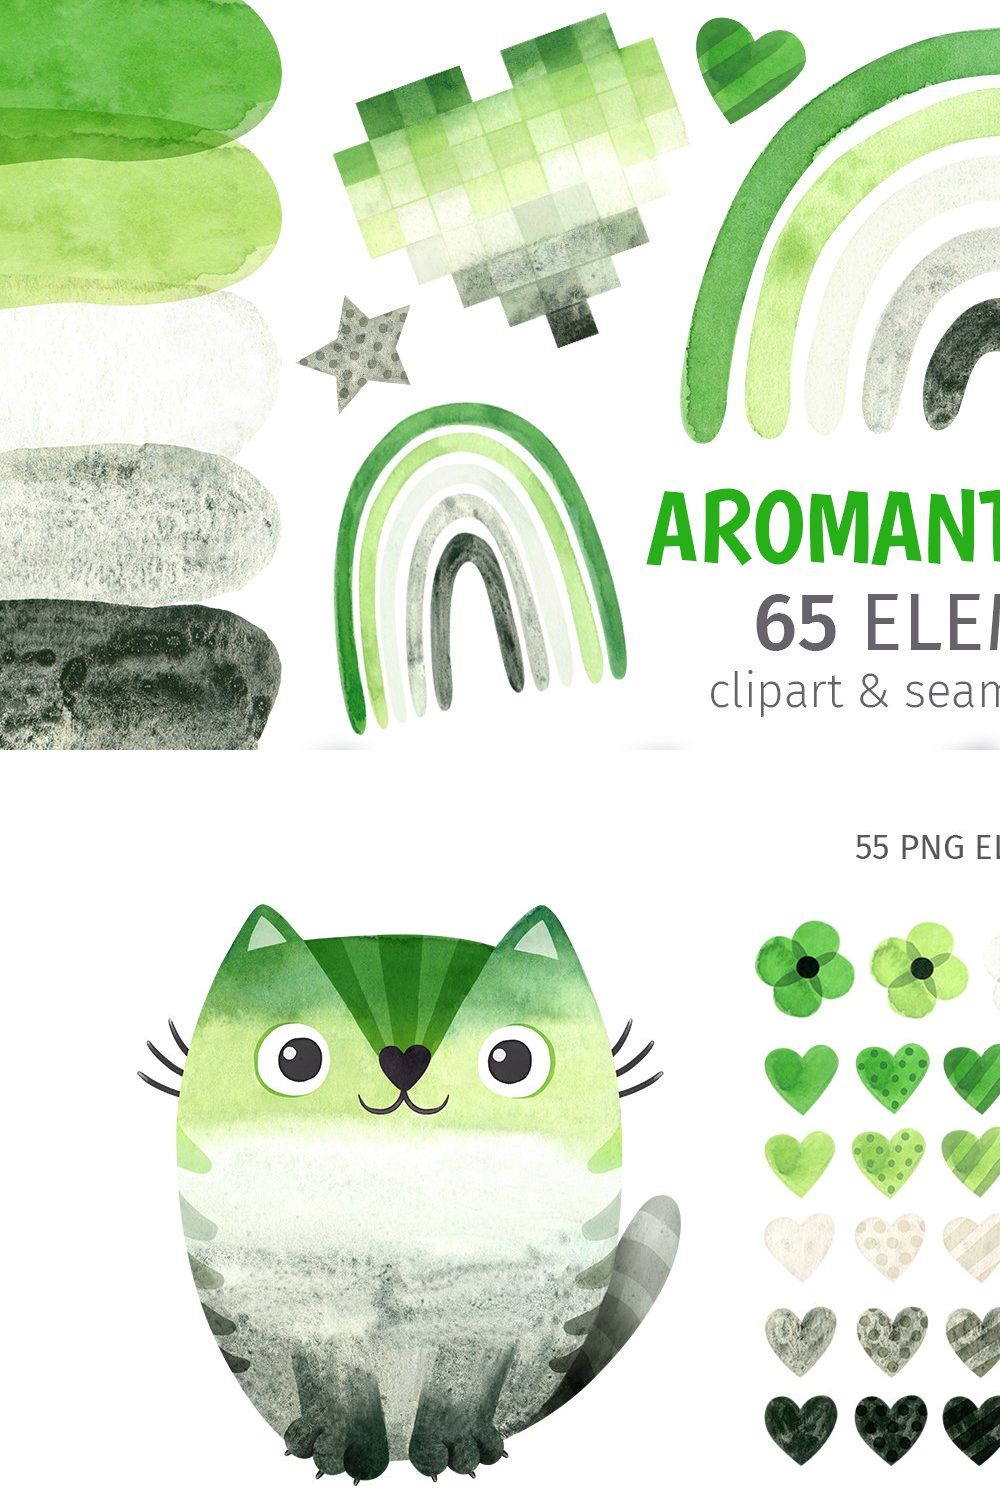 Aromantic pride clipart and patterns pinterest preview image.